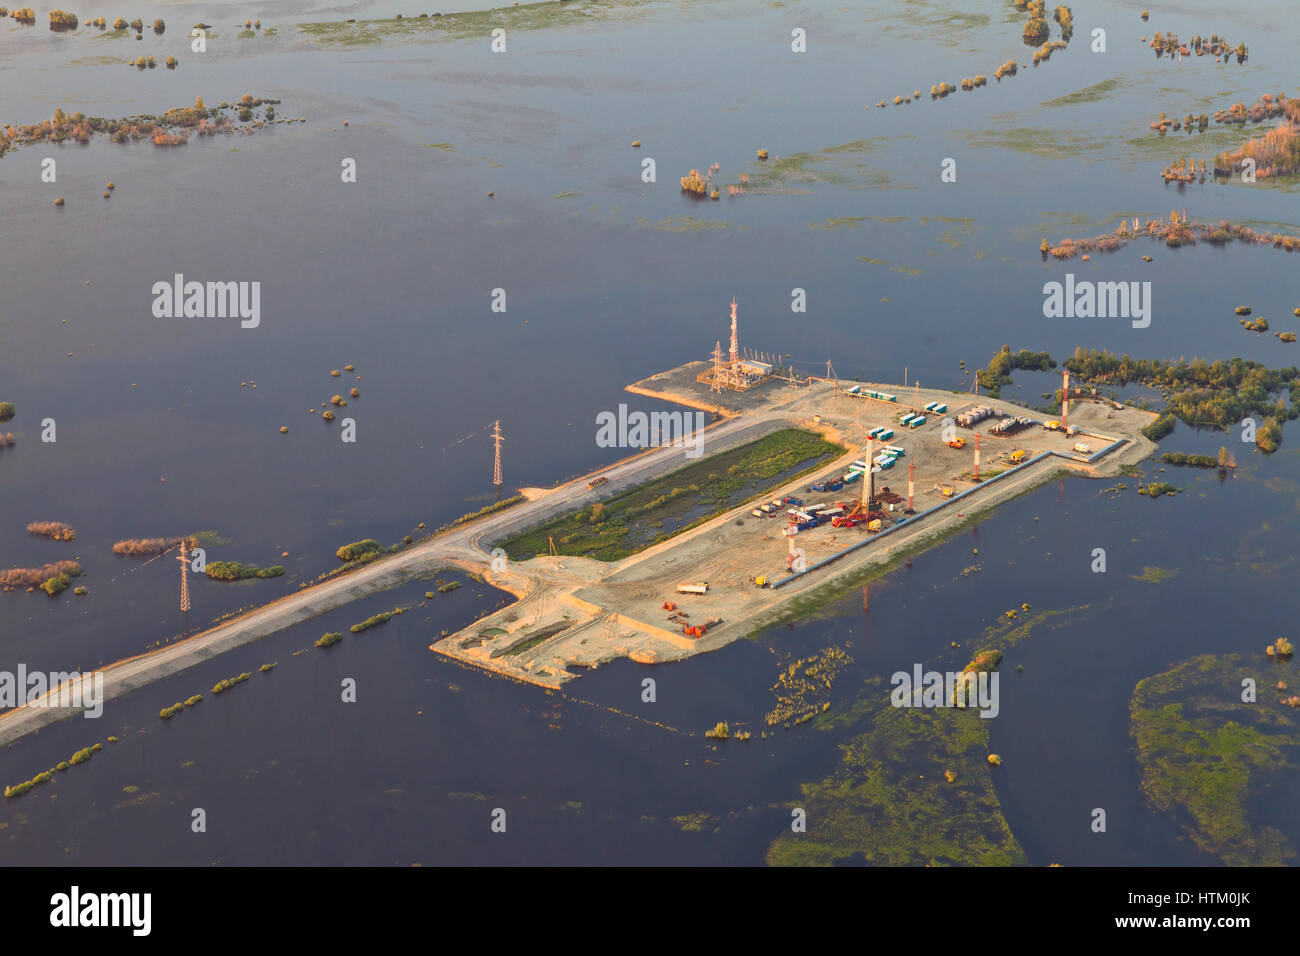 Oil rig in flood area, top view Stock Photo